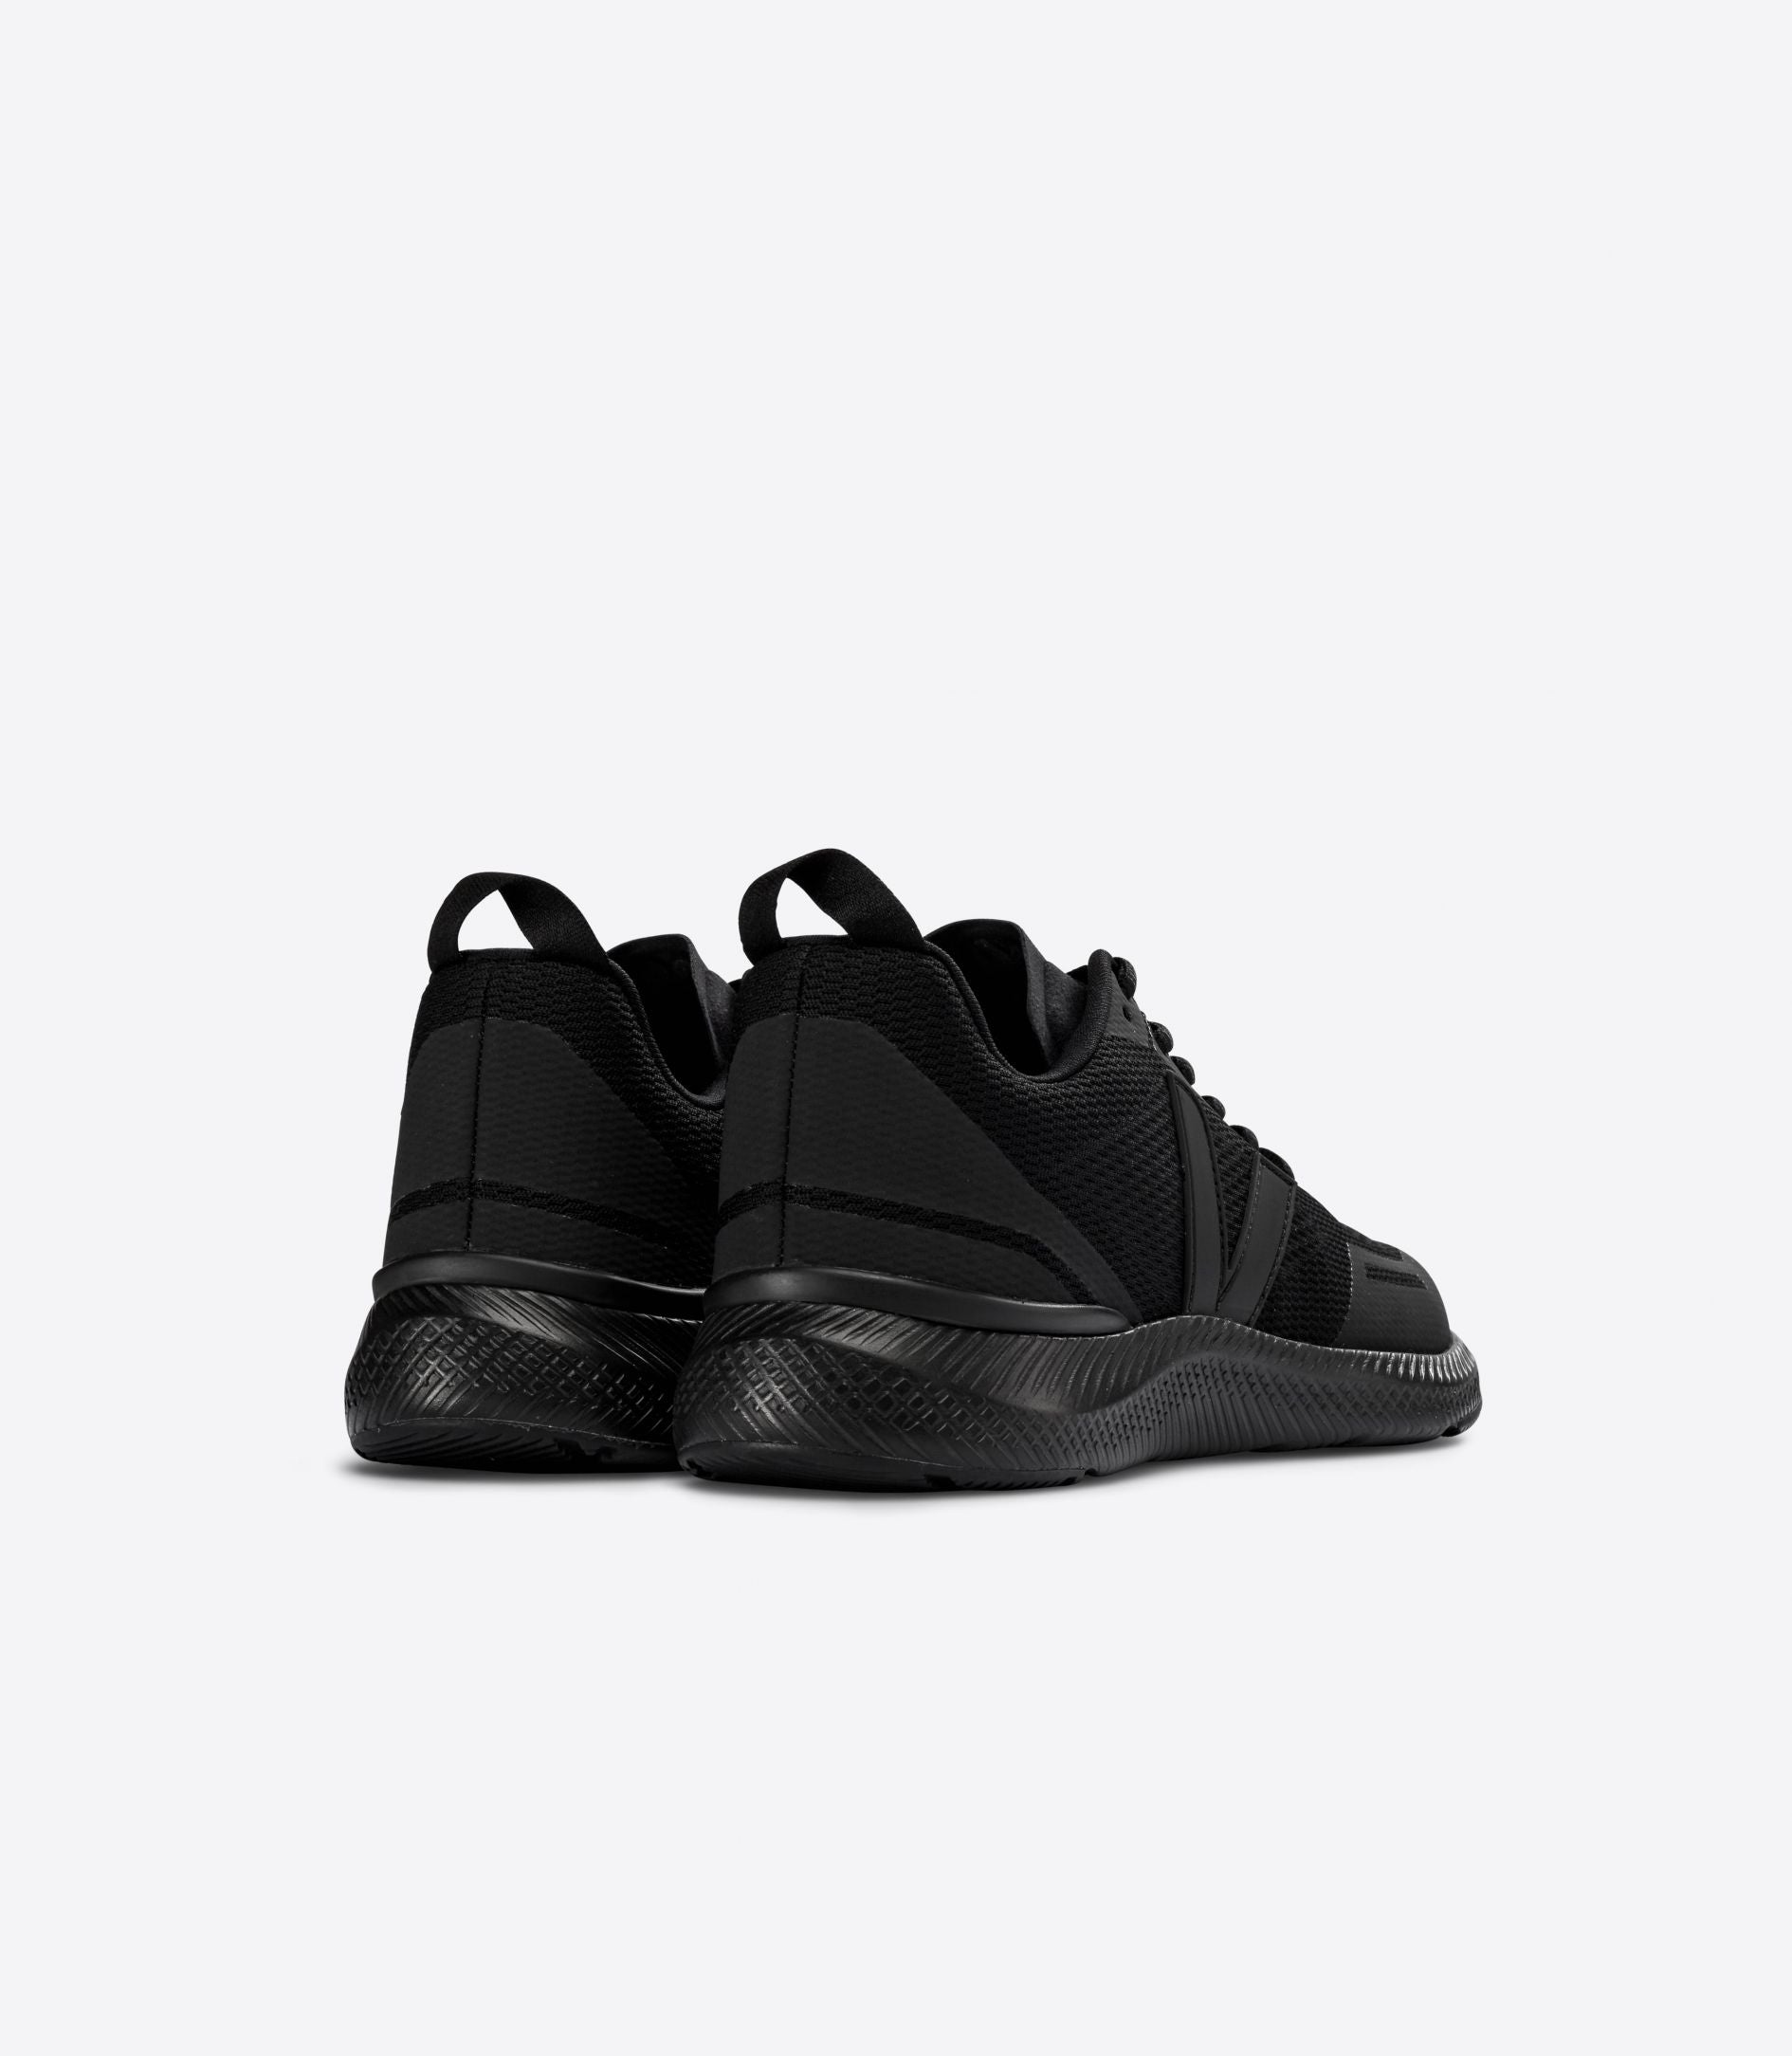 Back angle view of a pair of Women's Impala's by VEJA in all black